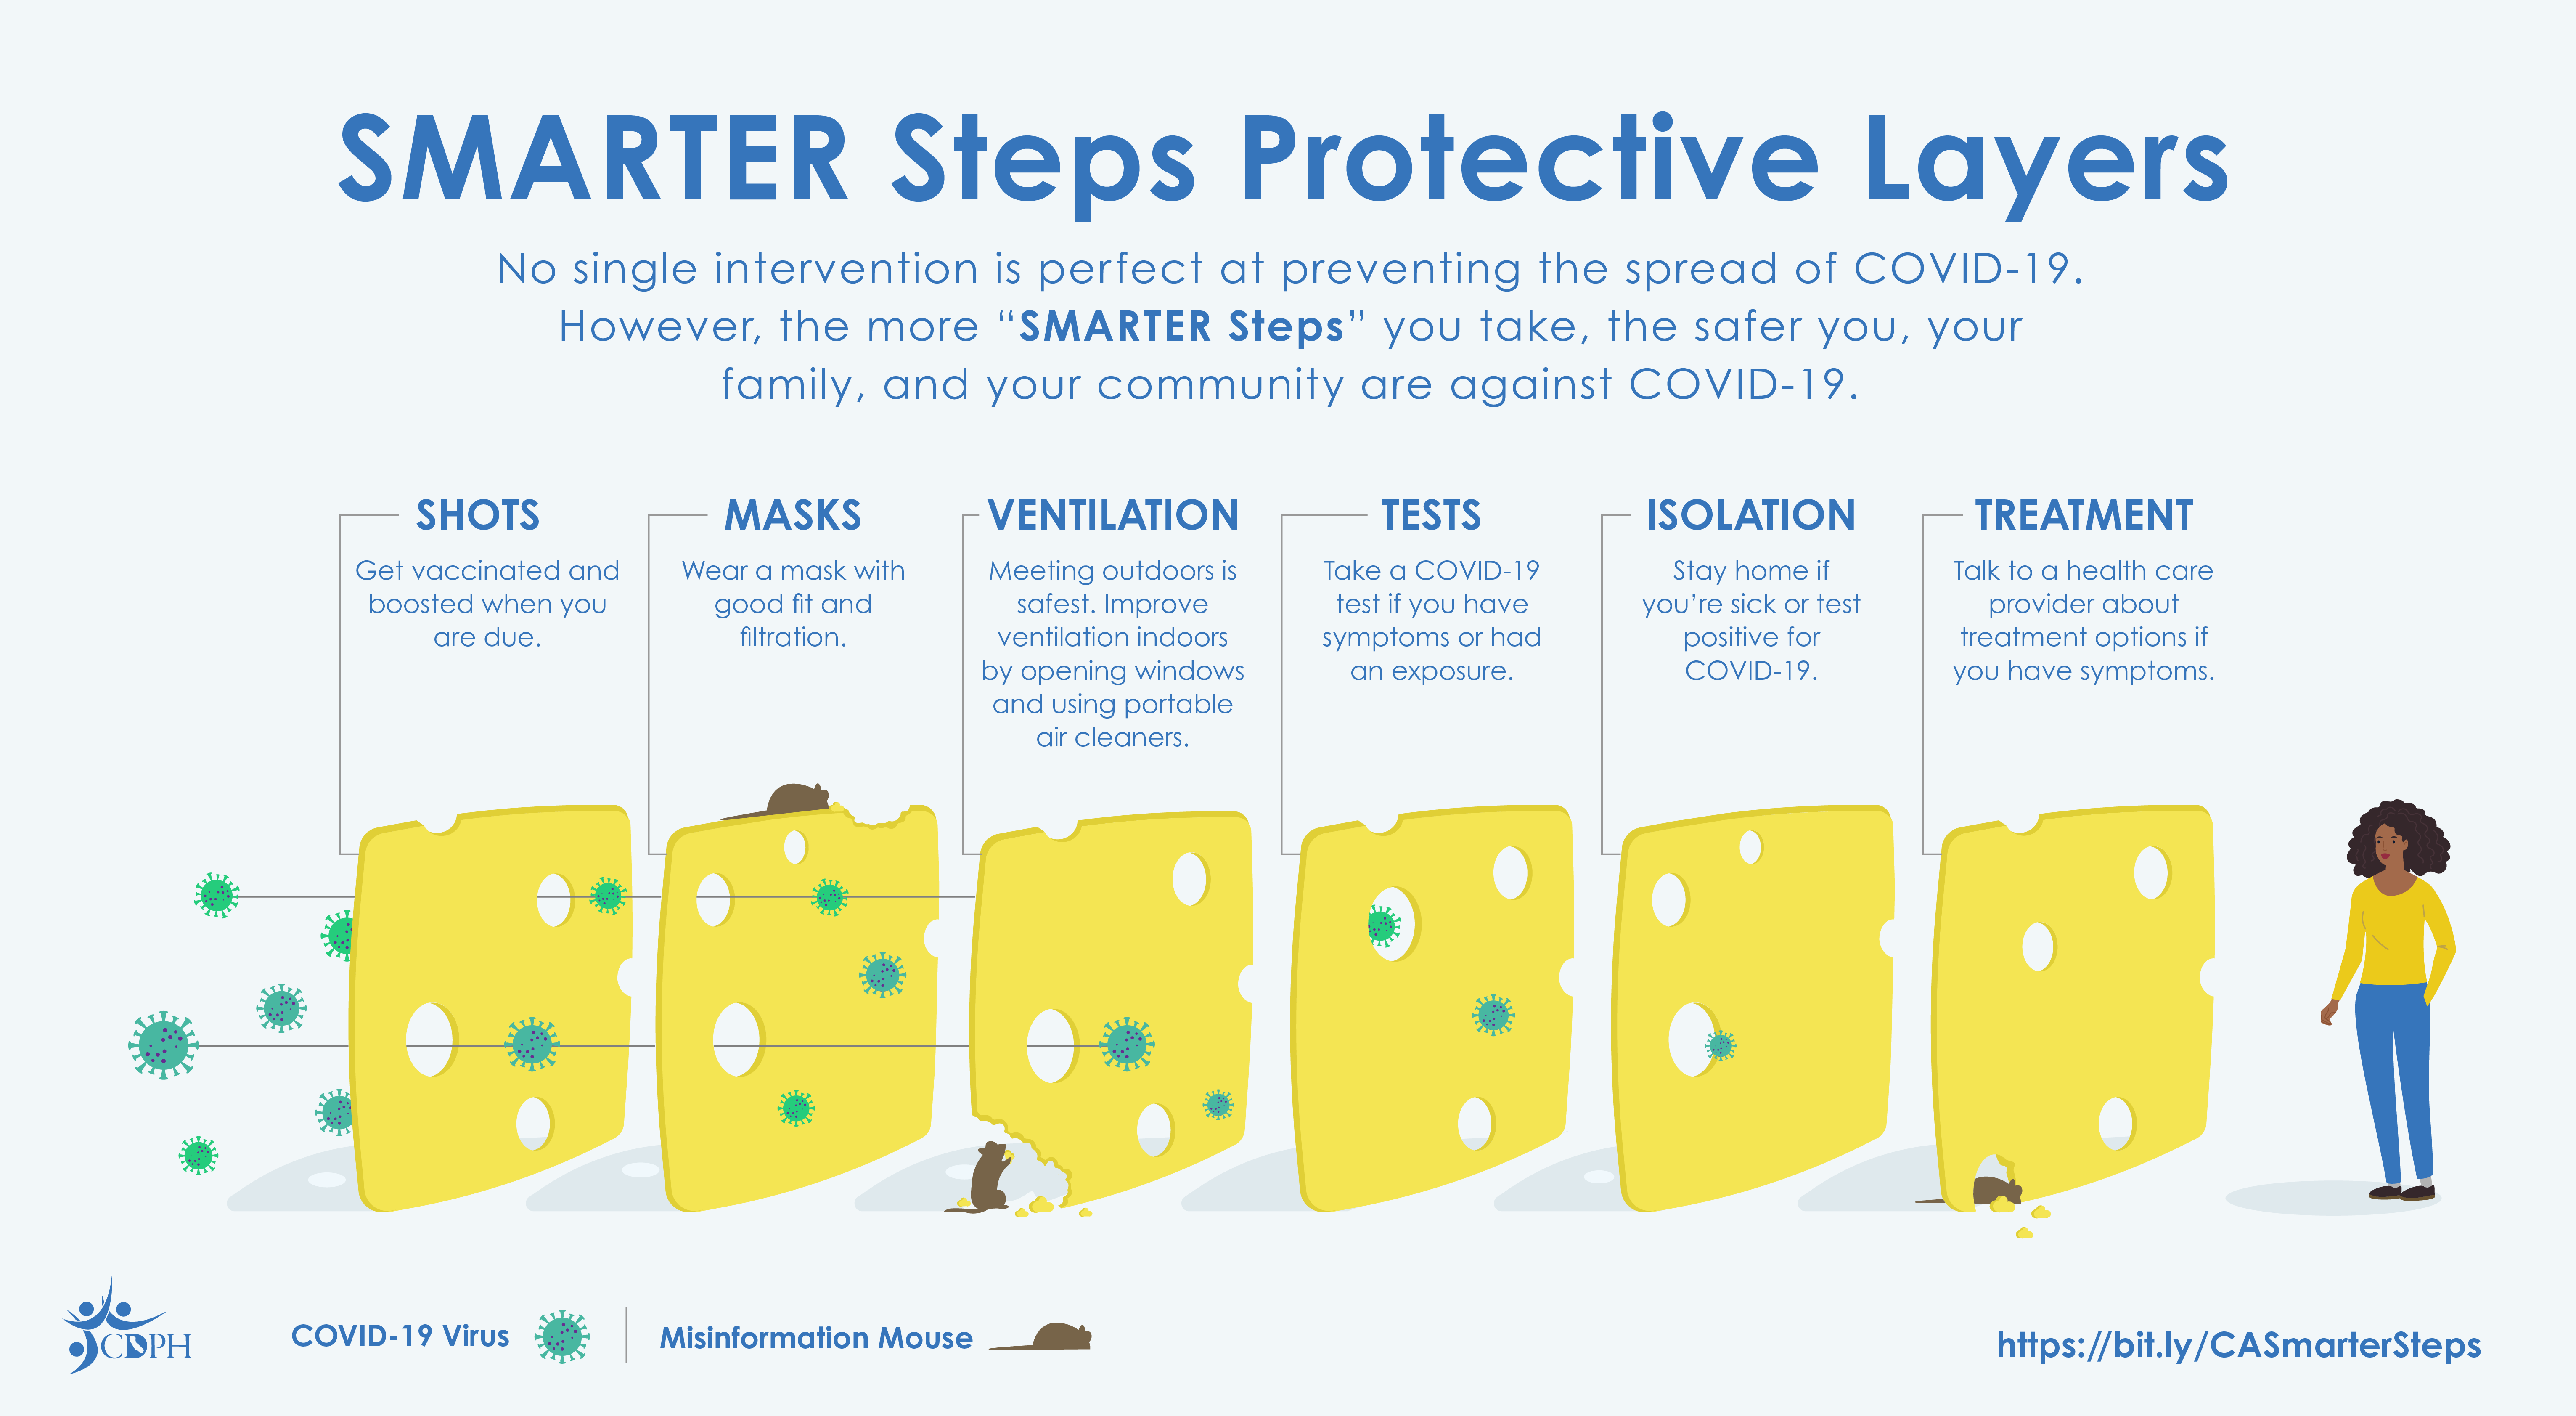 The more protective layers you take - shots, masks, ventilation, tests, isolation, and treatment - the safer you are against COVID-19.